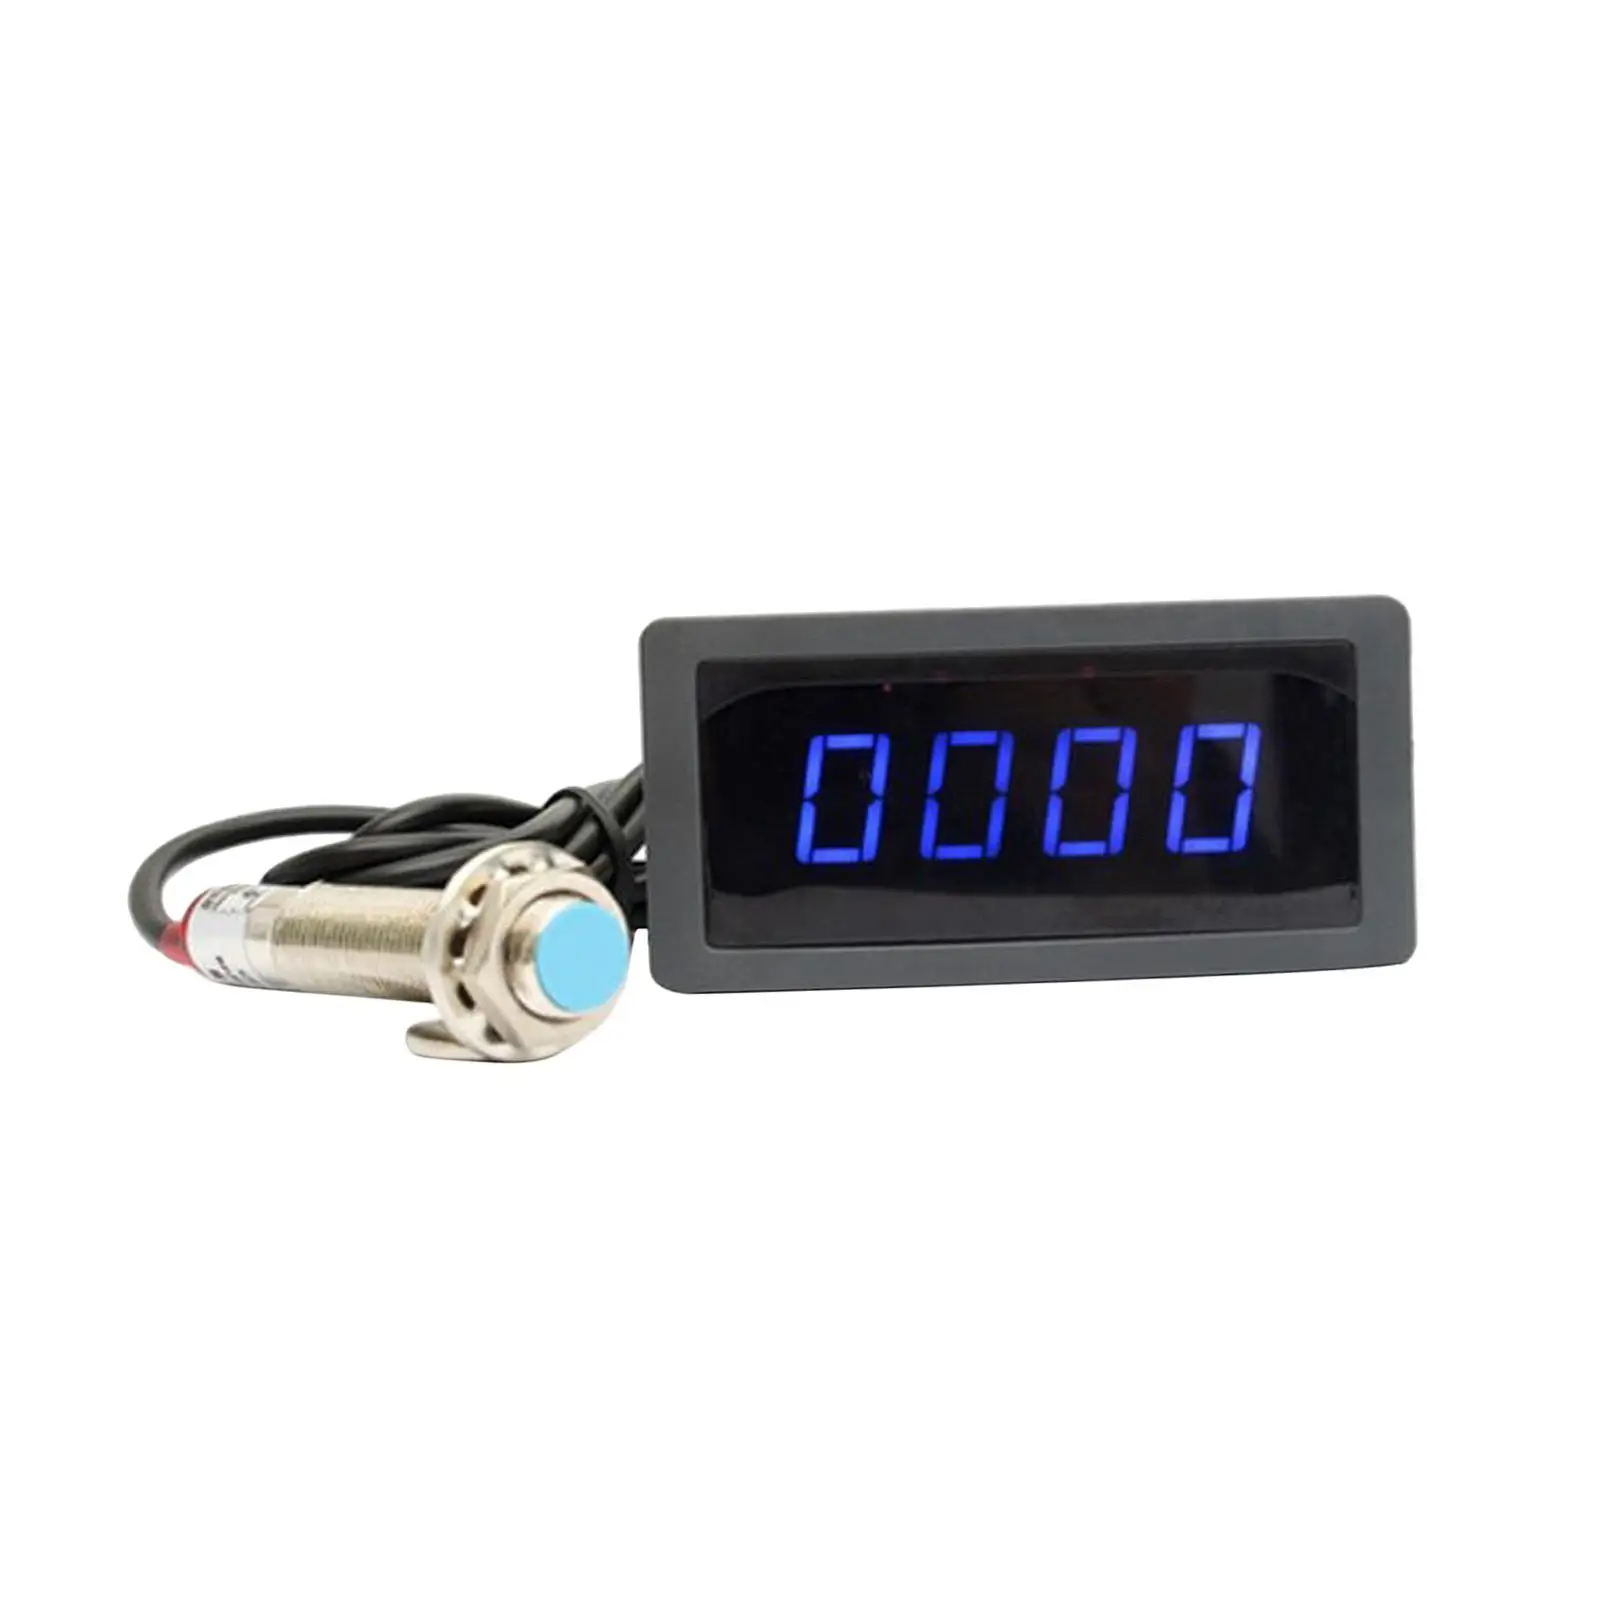 0.56inch Digital Tachometer Green/Blue LED Tachometer with Switch 10-9999RPM